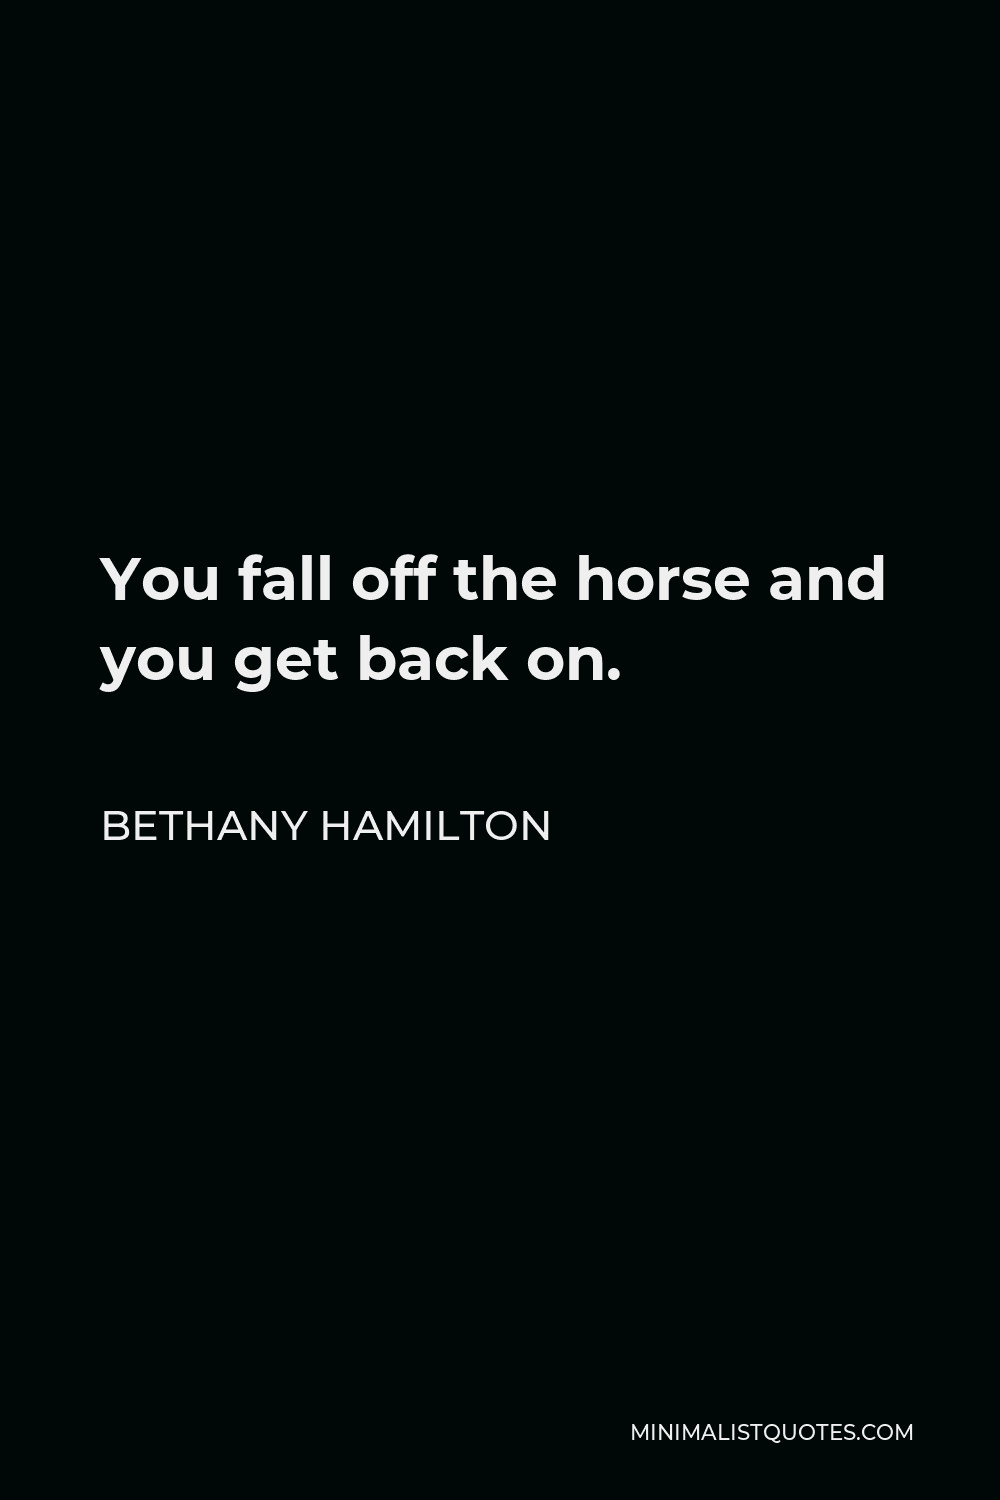 Bethany Hamilton Quote - You fall off the horse and you get back on.